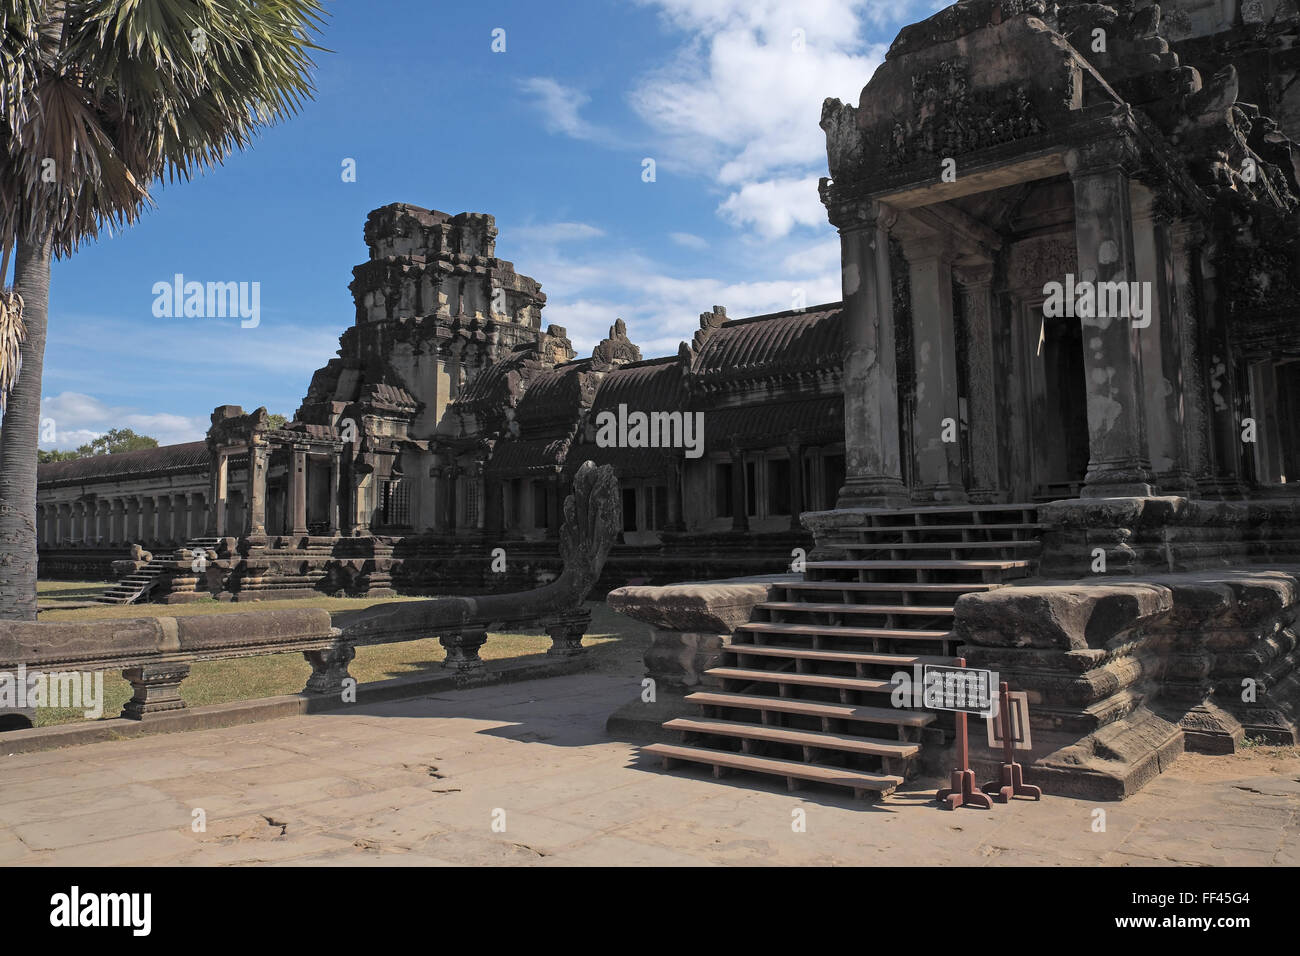 Entrances to Angkor Wat on its western facade, near Siem Reap, Cambodia, Asia. Stock Photo